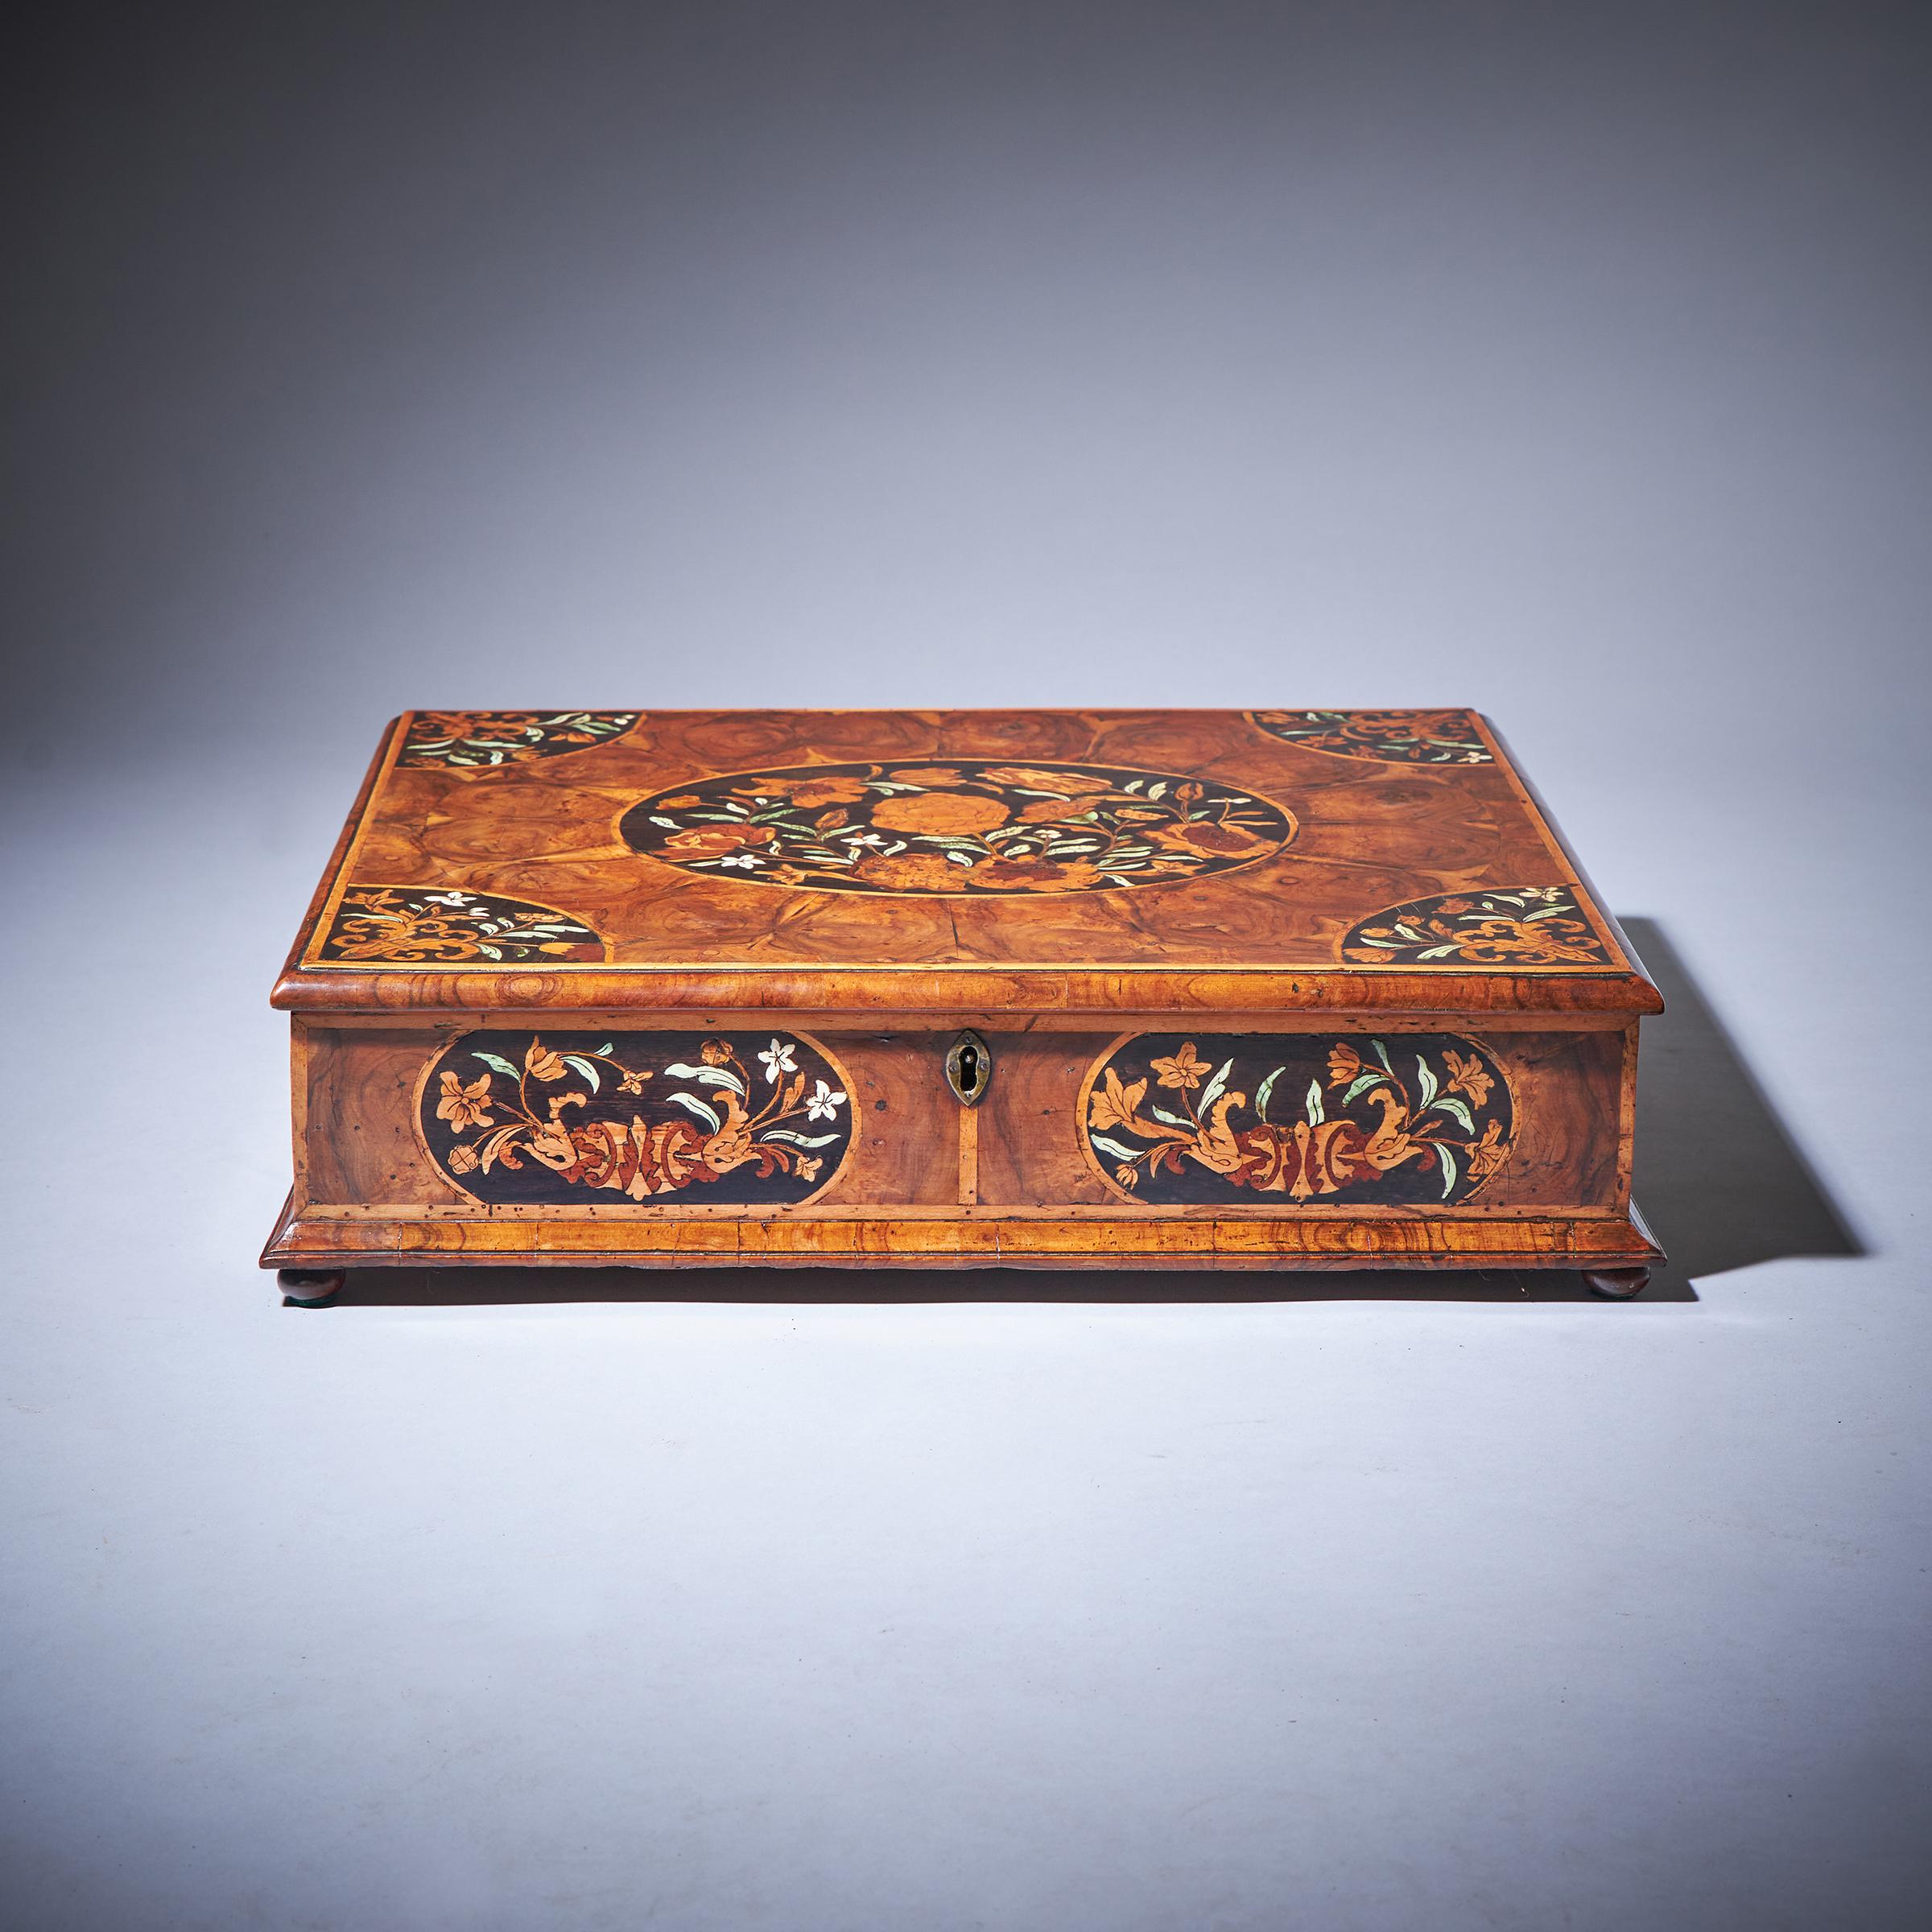 A fine and rare 17th-century William and Mary olive oyster floral marquetry lace box, circa 1685. England

The cross grain olive moulded and holly banded top is centred by an oval of marquetry depicting spring flowers and green stained bone leaves